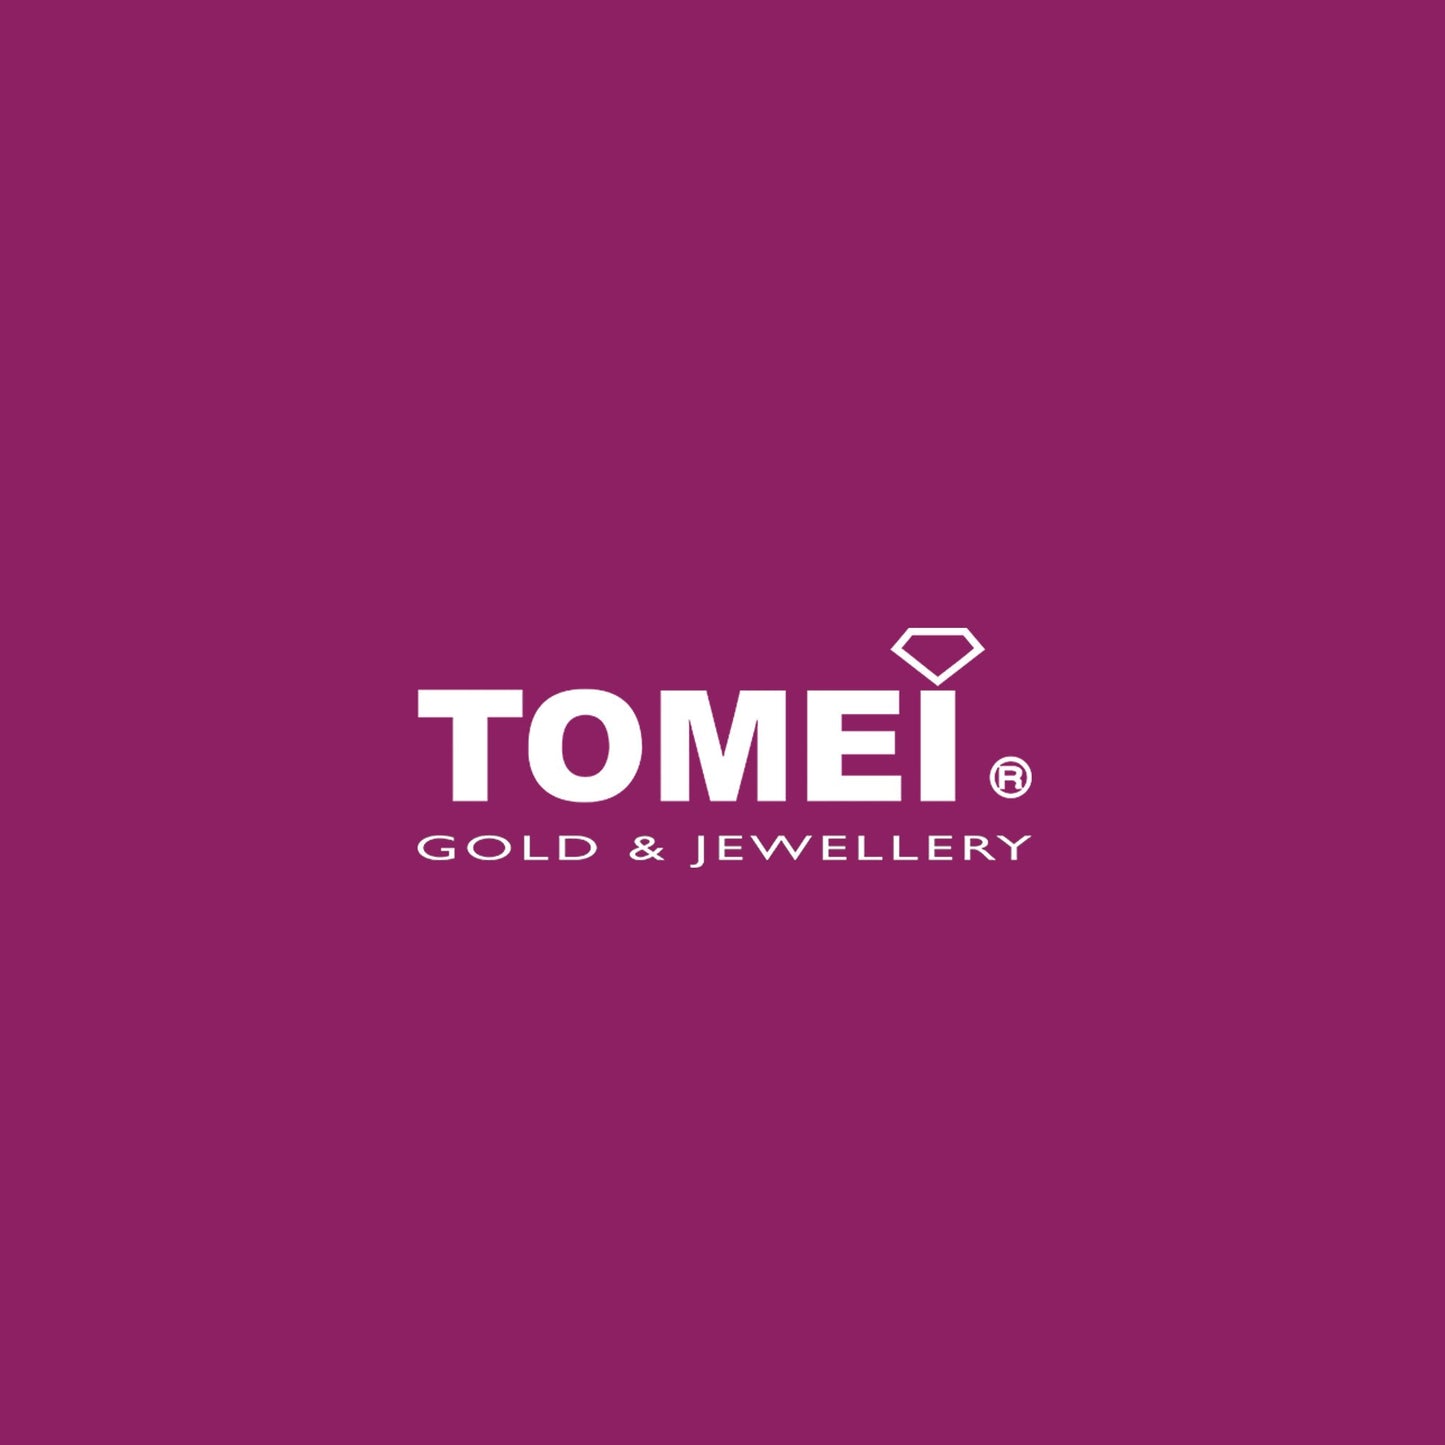 TOMEI X Hello Kitty Pink Ribbon Ring, Yellow Gold 916